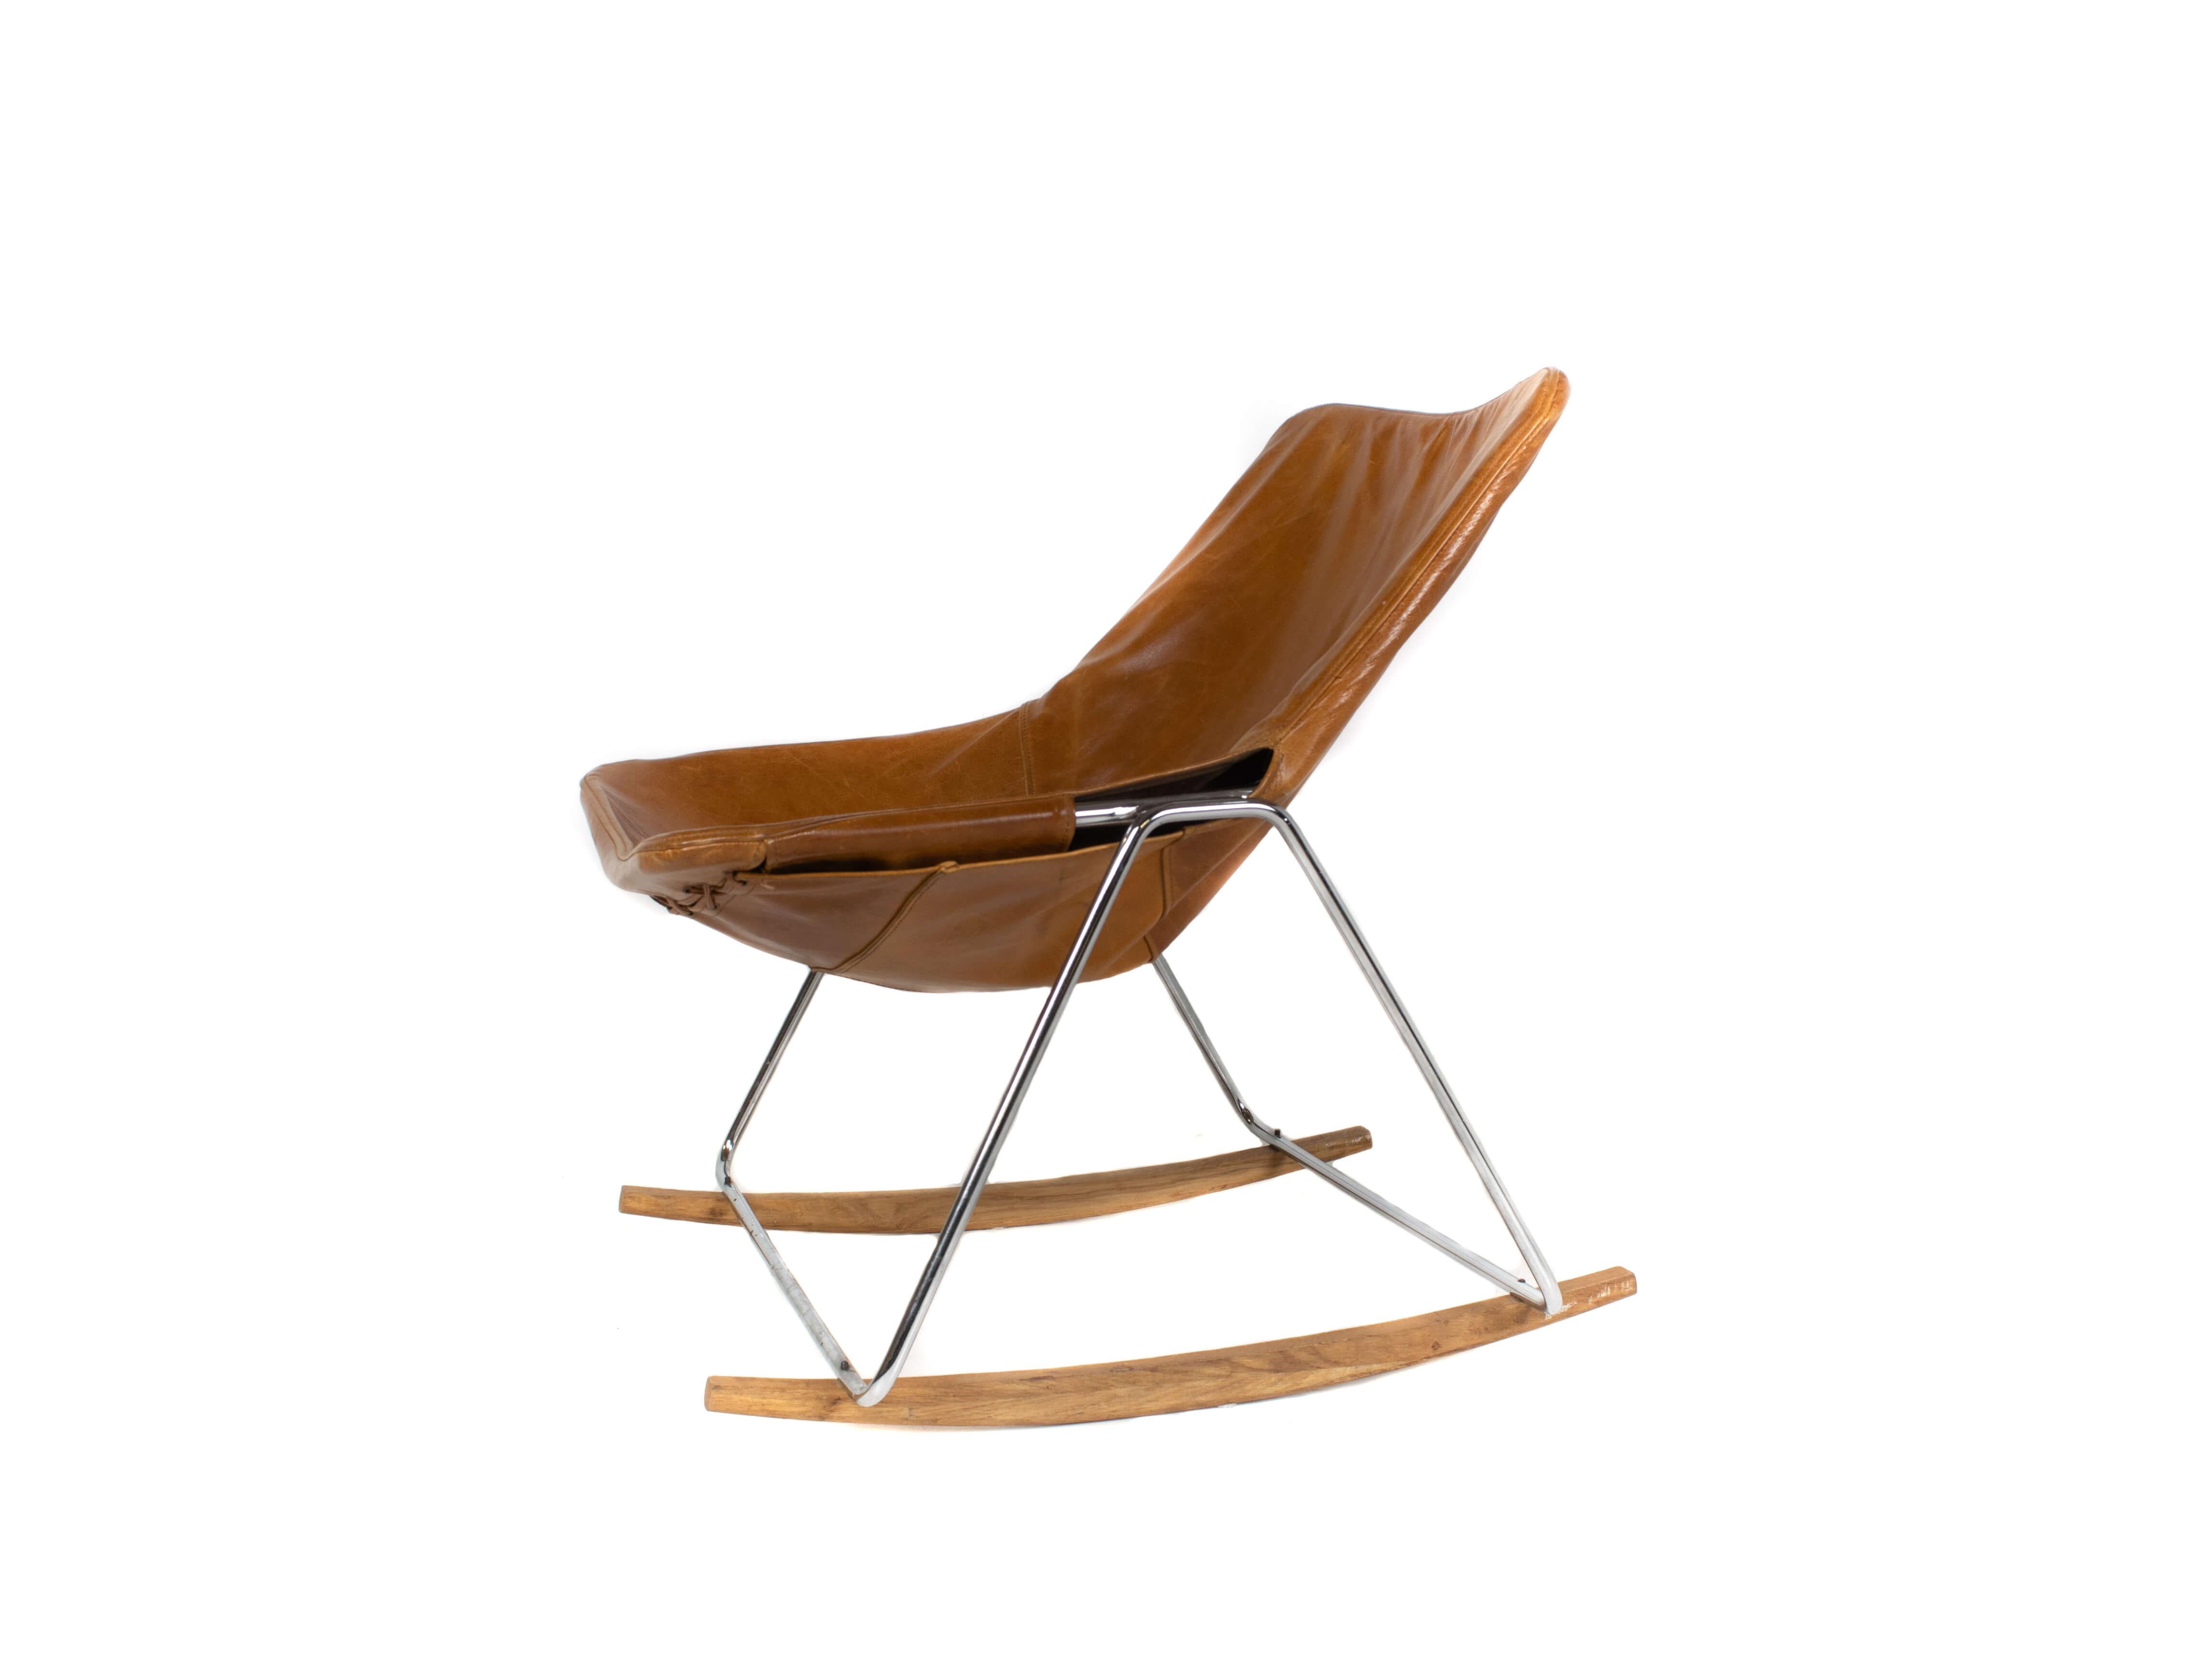 Rare G1 leather rocking chair by Pierre Guariche from France. Designed in the 1950s for Airborne. The simplistic and modern design consist of a tubular steel frame with a seating of cognac leather. Underneath two wooden feet to make this a rocking